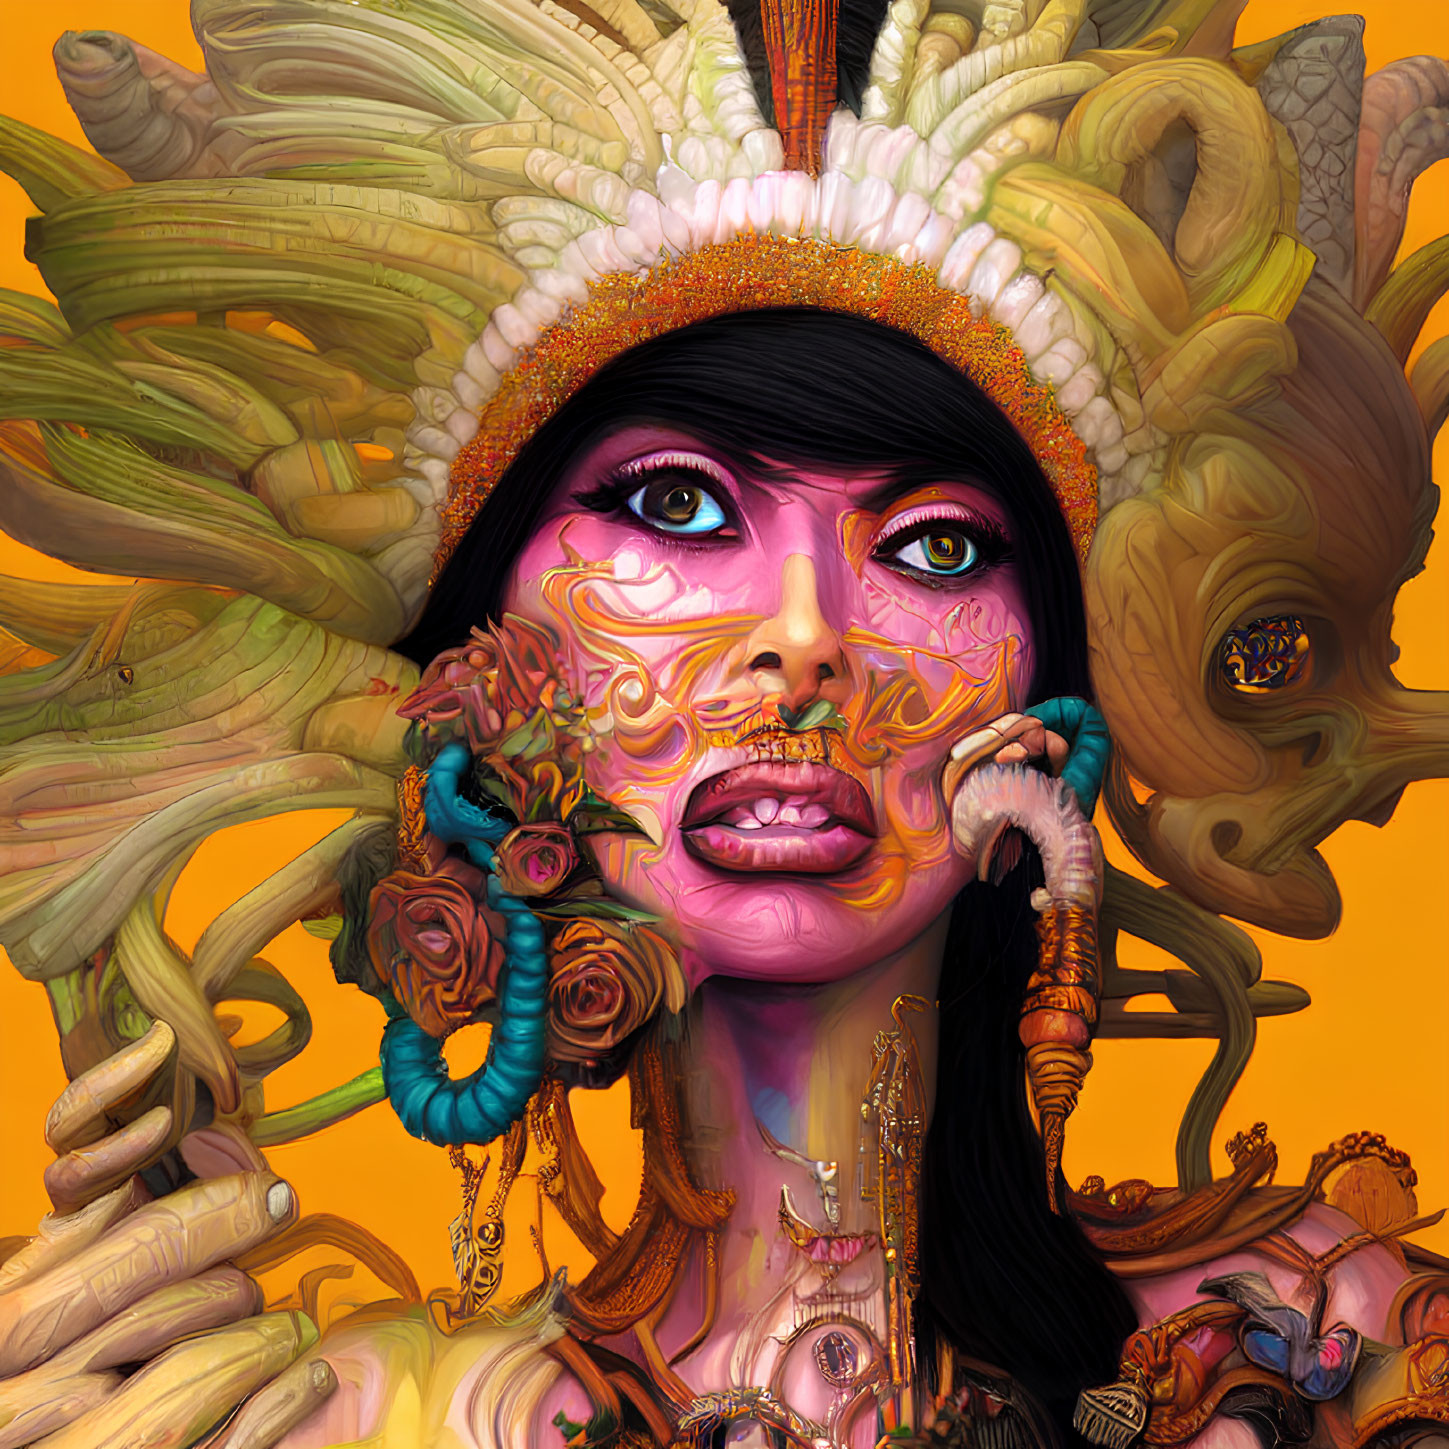 Vibrant digital artwork of woman with elaborate headdress and face paint